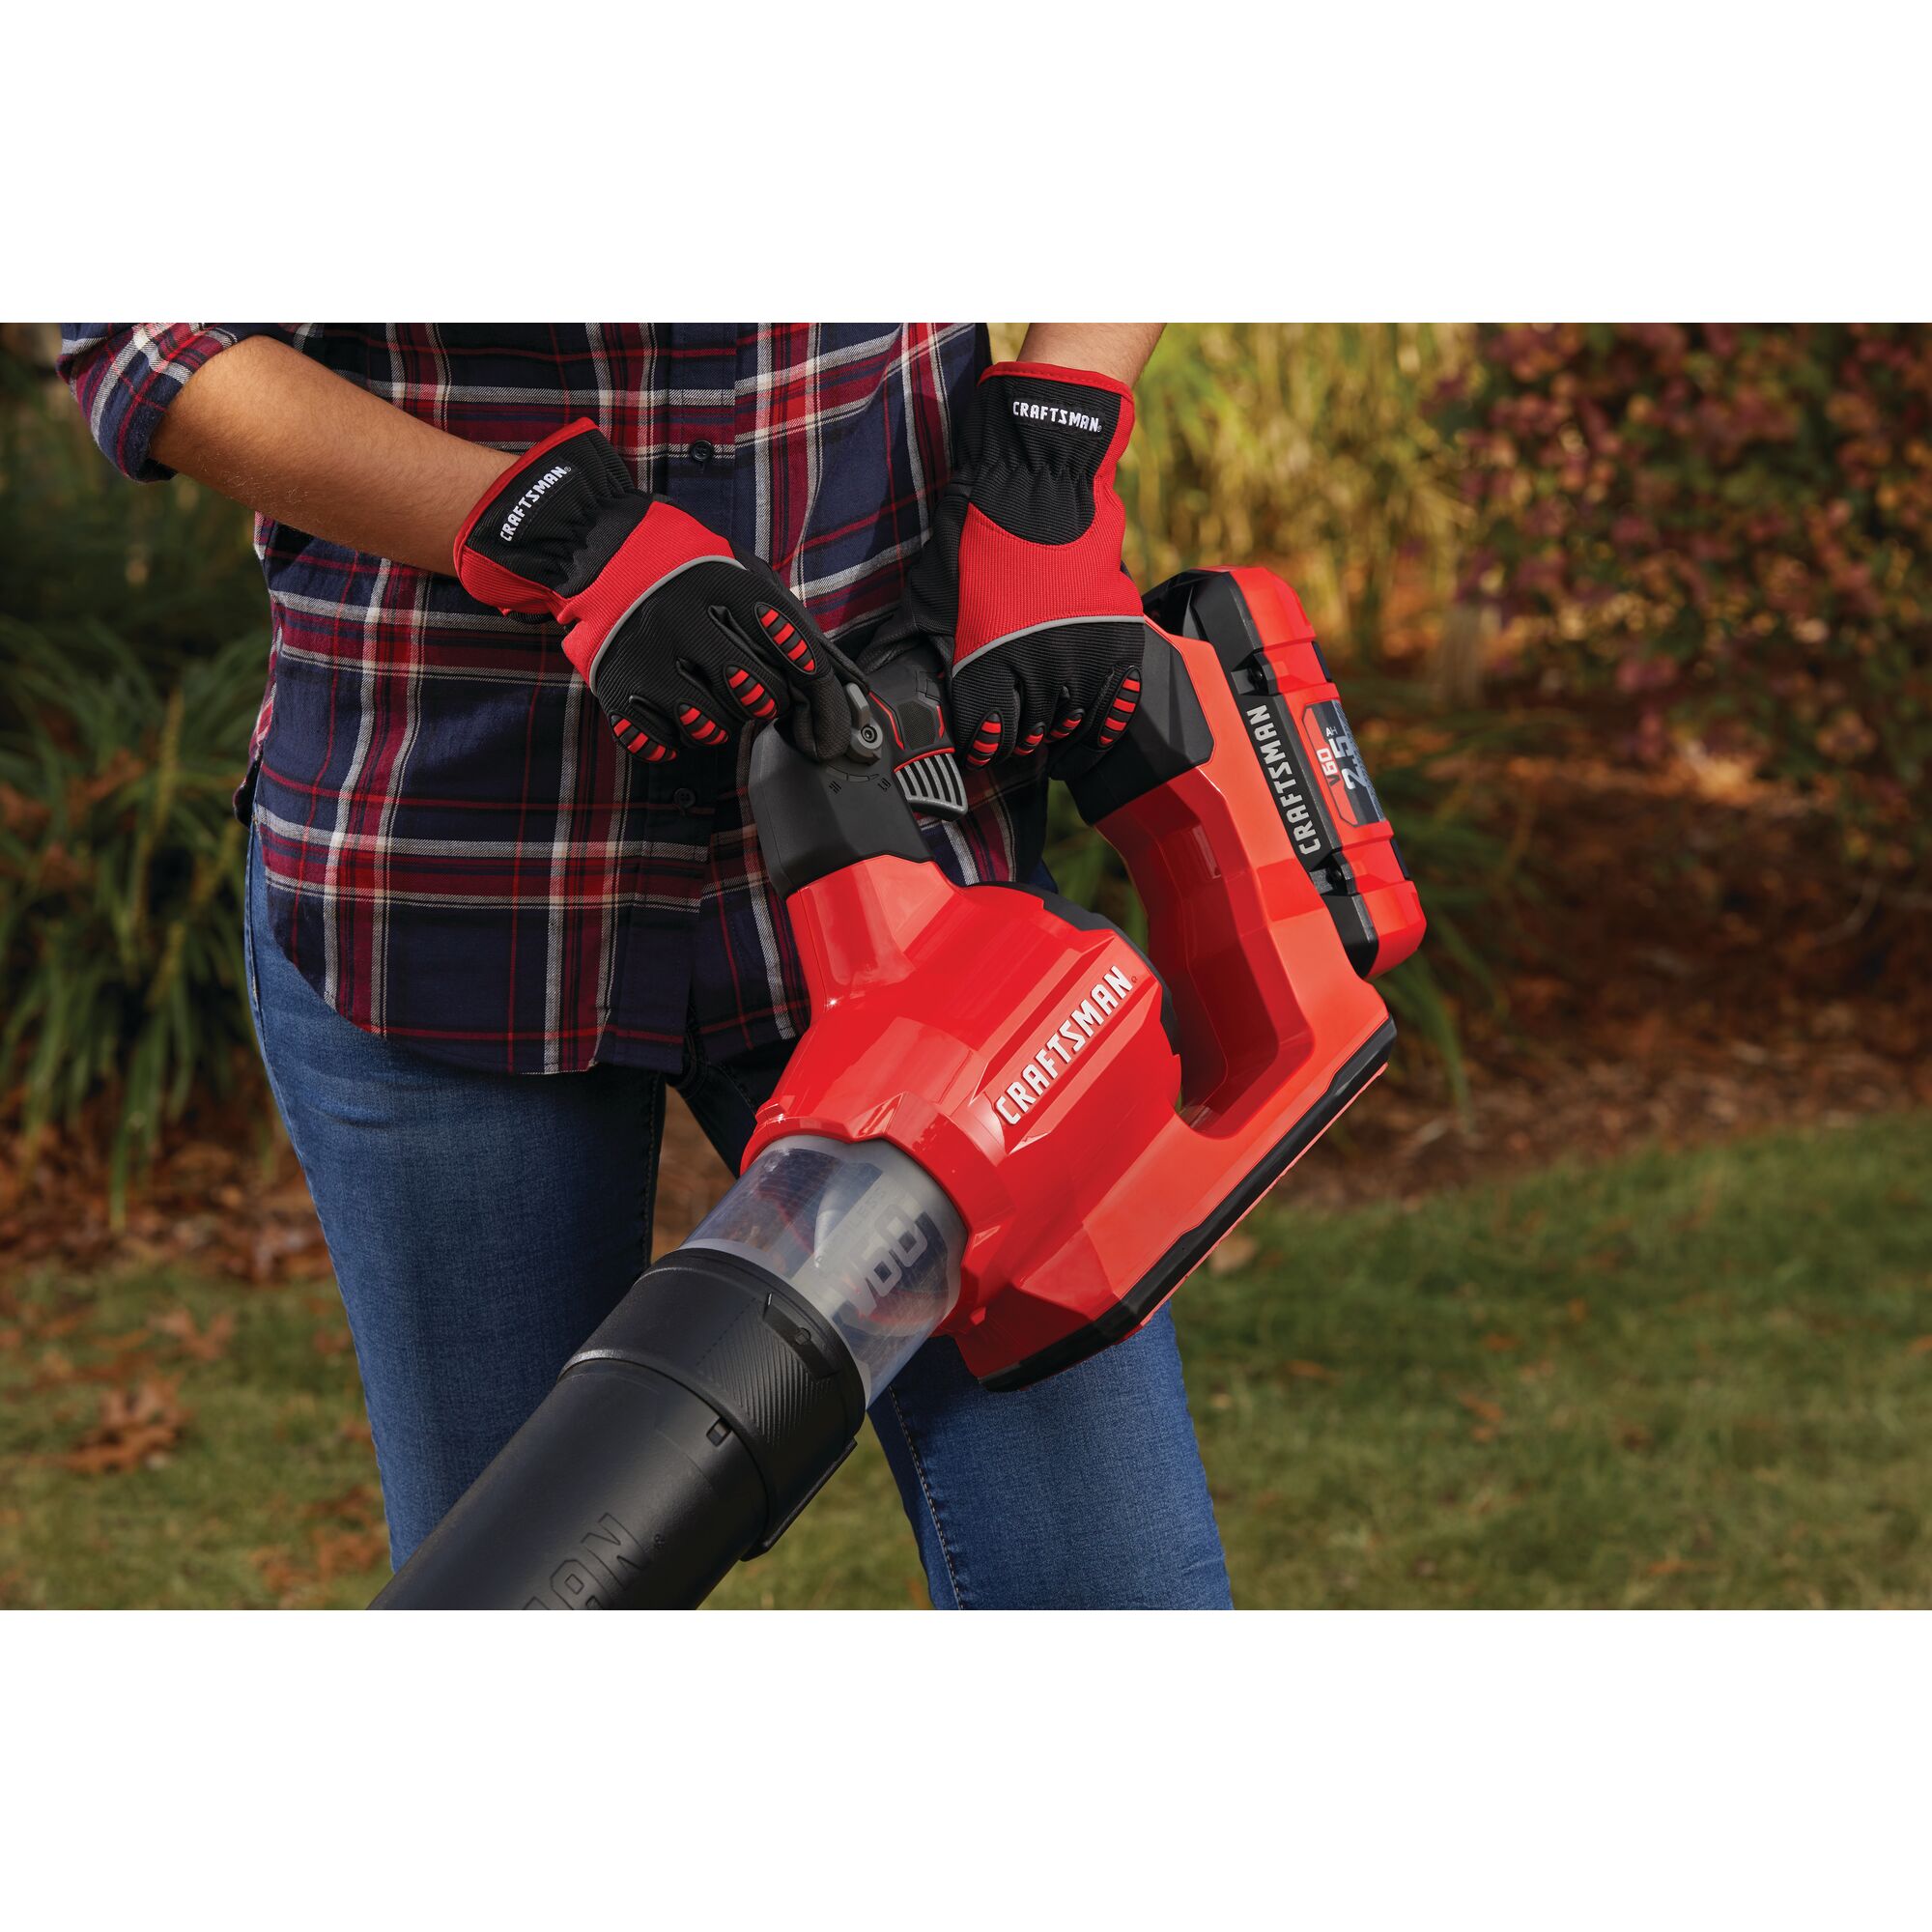 Cruise control allows users to choose between more power or more runtime feature of volt 60 cordless brushless axial blower kit 2.5 Amp hour.